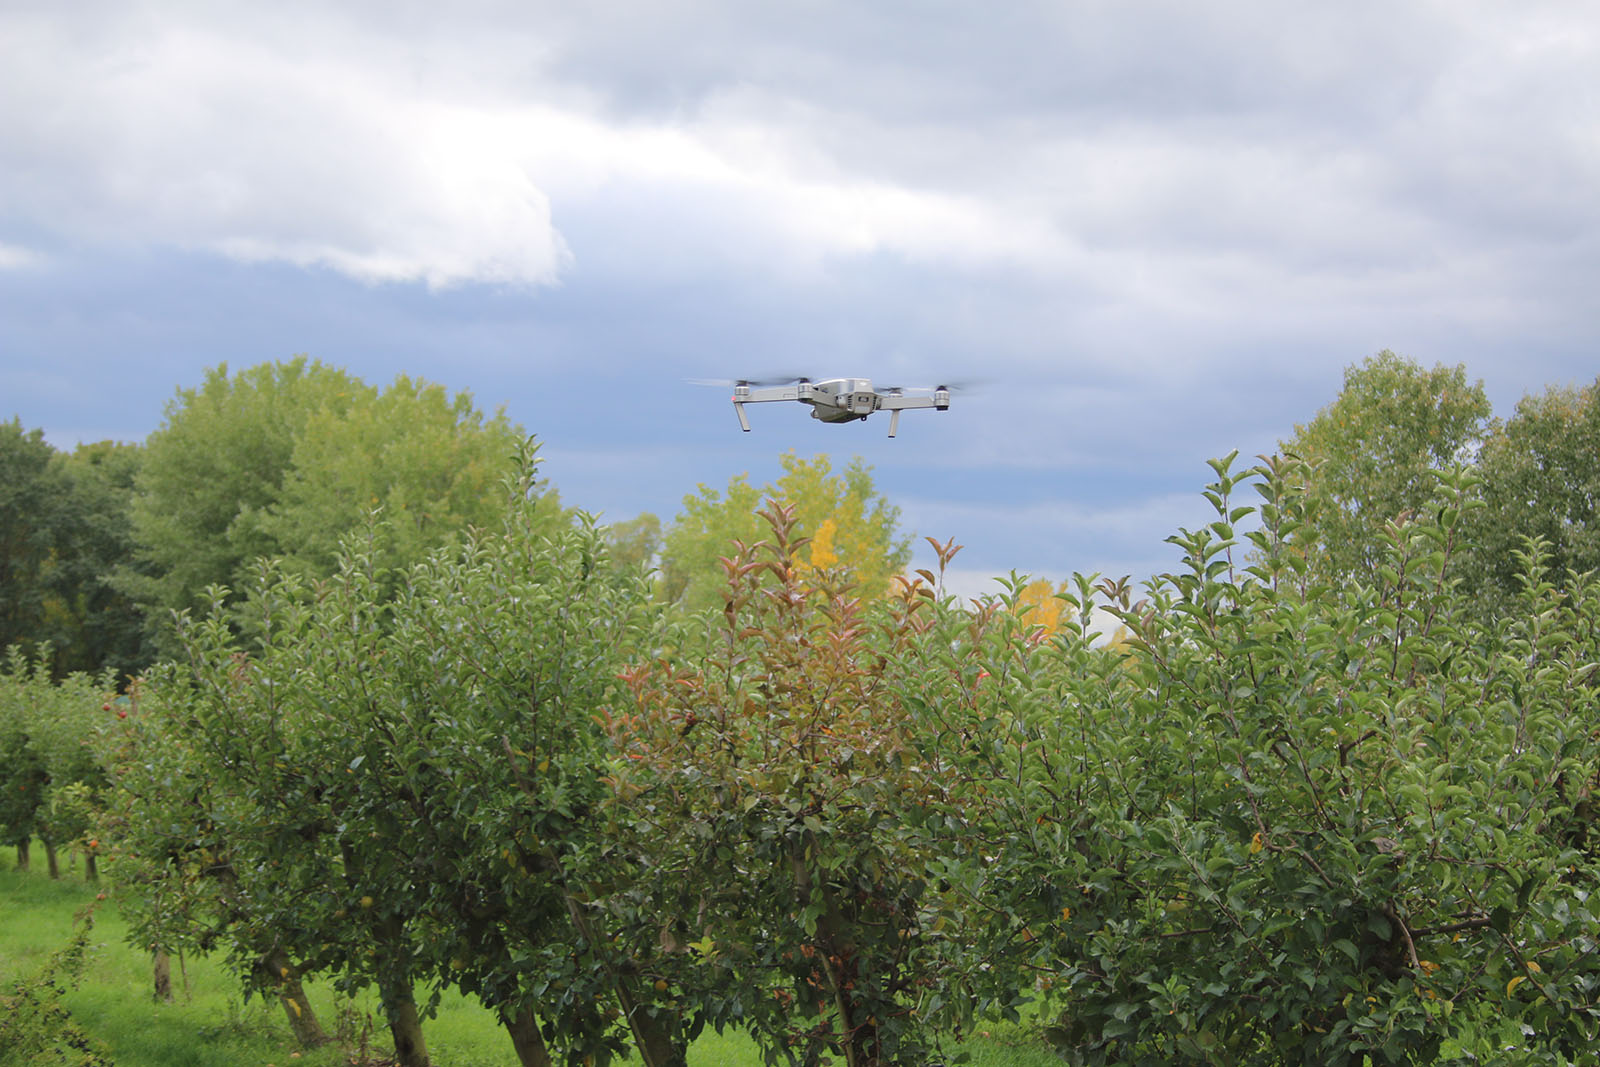 The research scientists get an overview of an entire orchard with a drone. In the future, disease symptoms will be detected right from drone or satellite images based on spectral signatures.